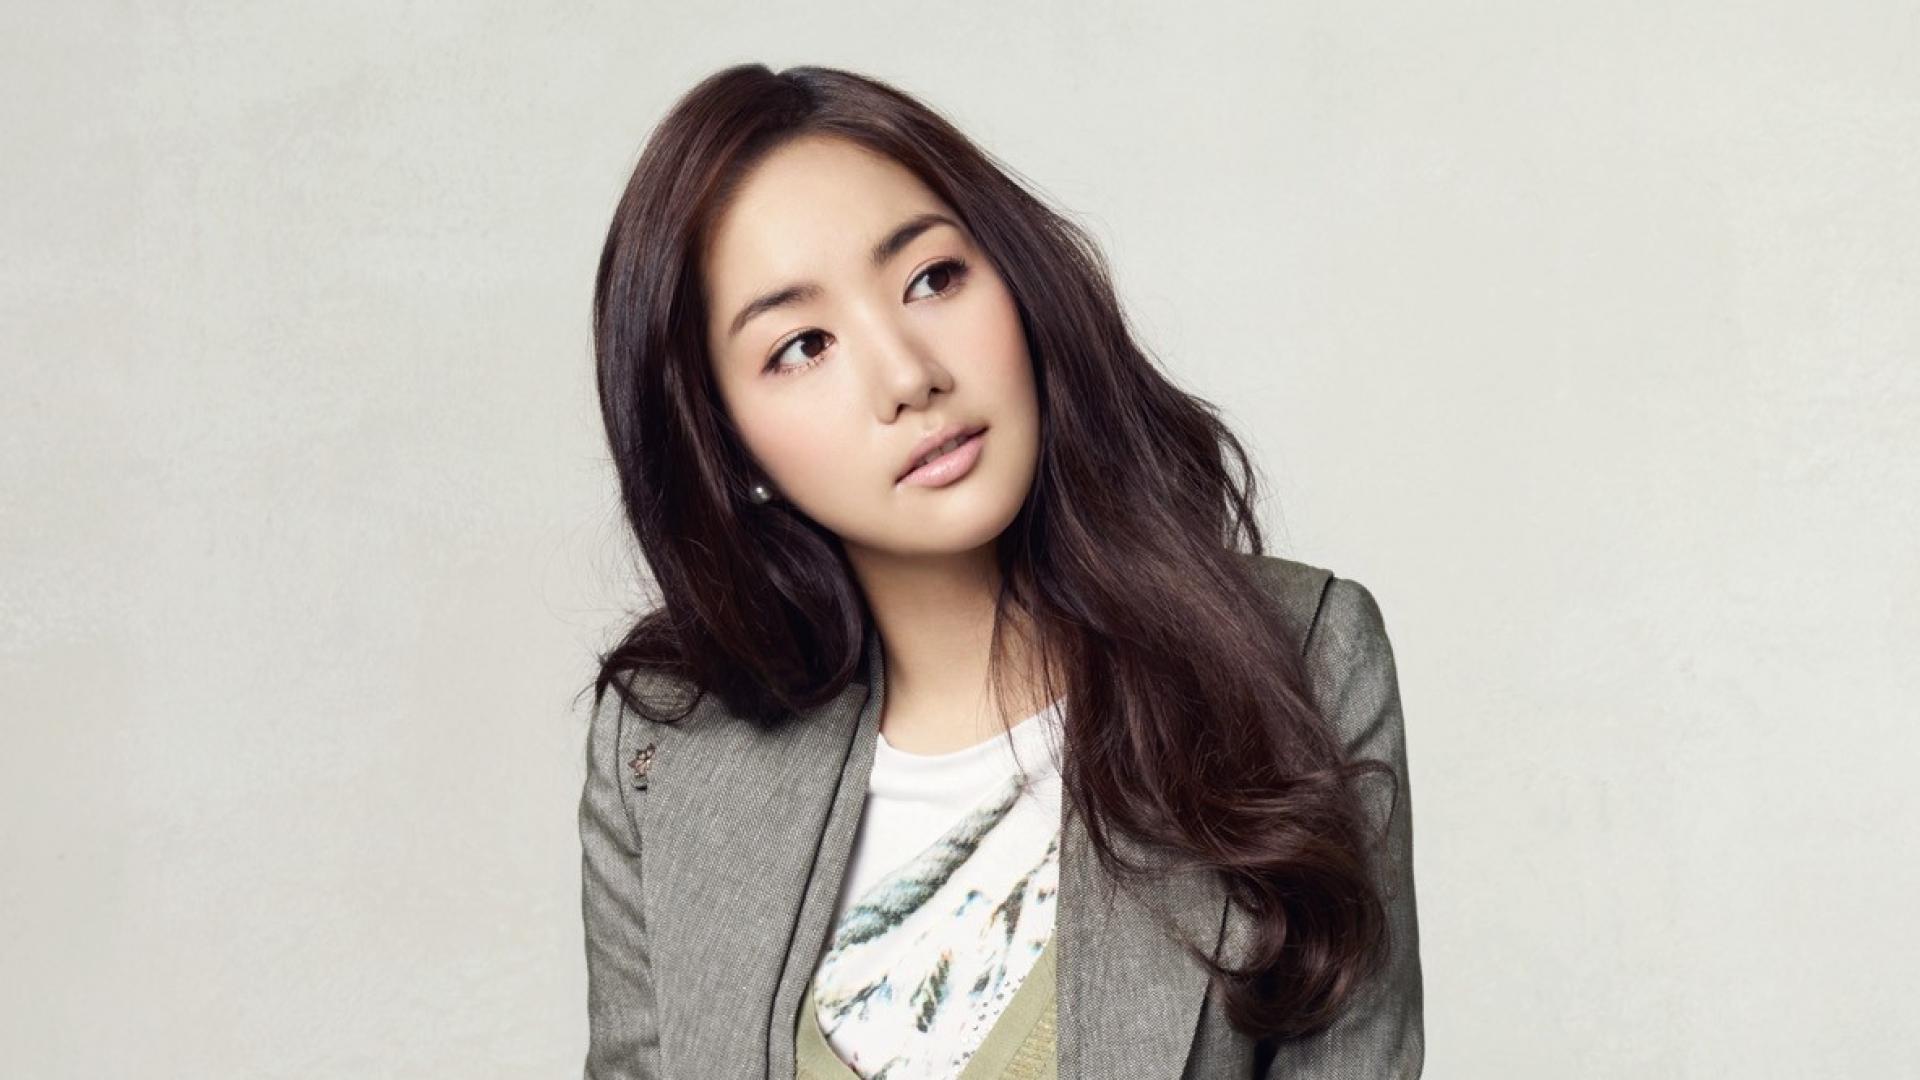 Park Min Young Wallpaper Image Photo Picture Background